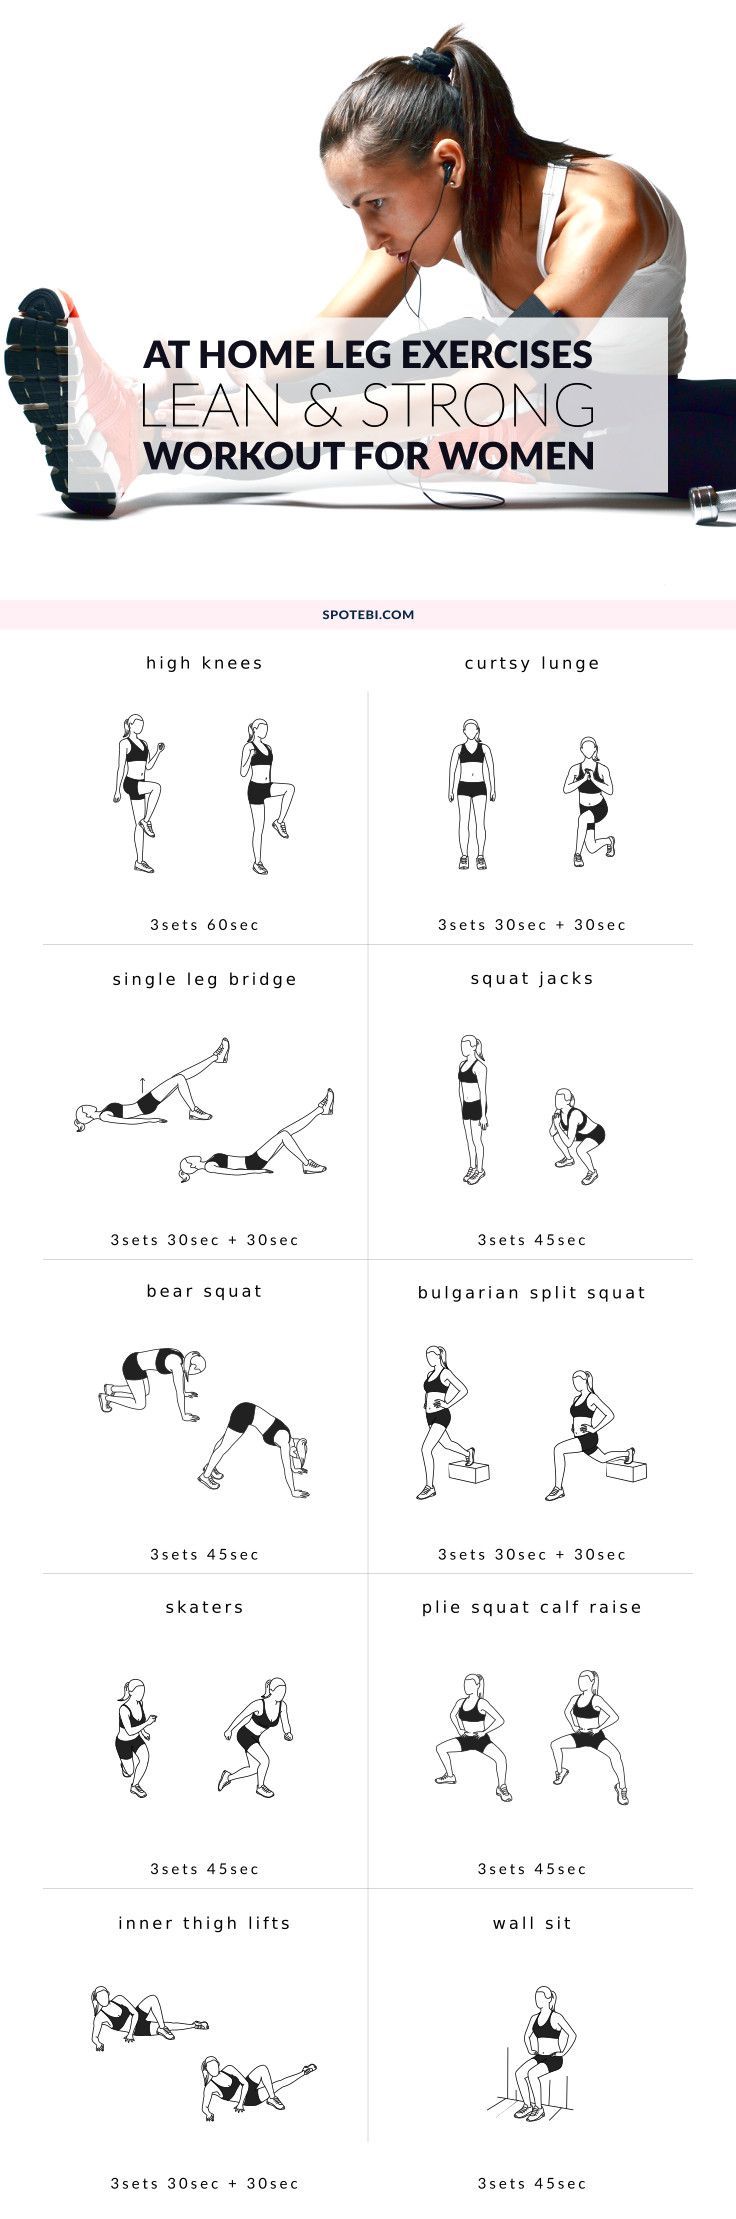 Upgrade your workout routine with these 10 leg exercises for women. Work your thighs, hips, quads, hamstrings and calves at home